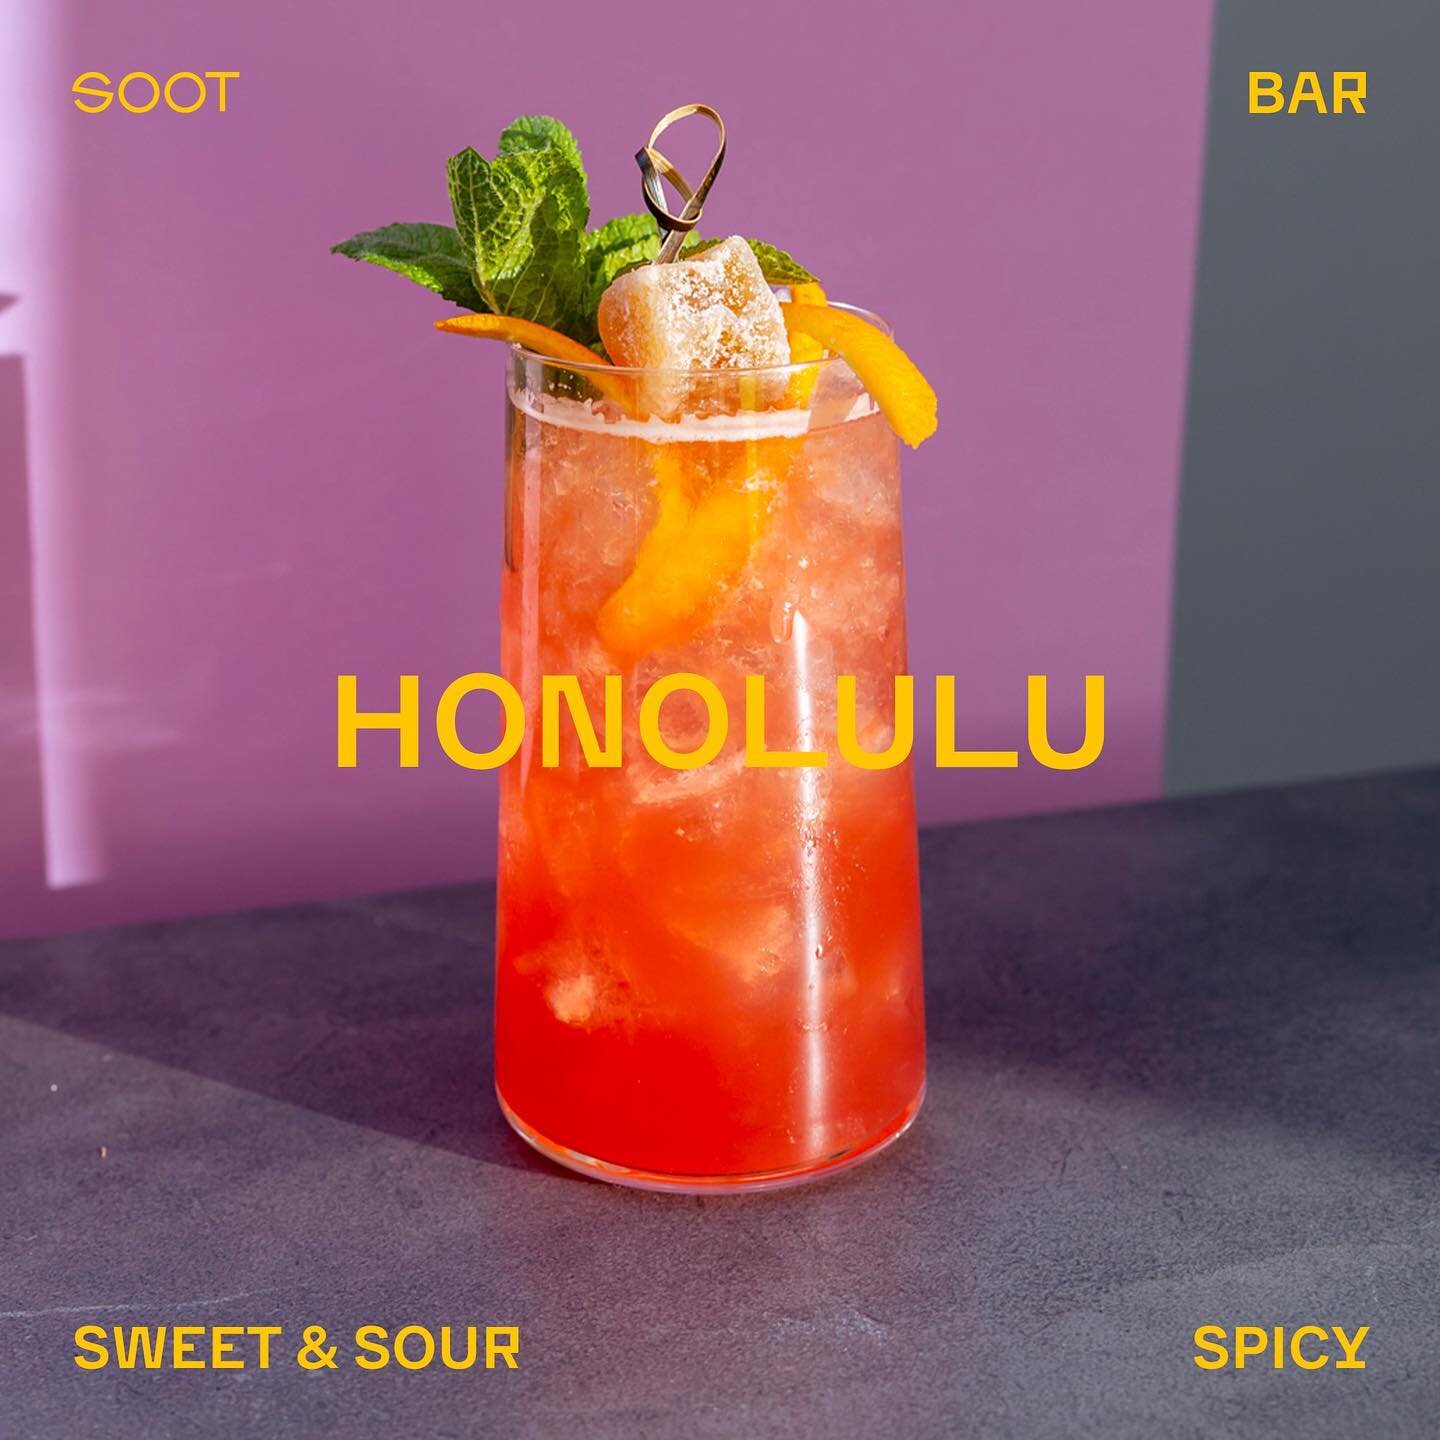 Take a break from the ordinary and treat yourself to the extraordinary with SOOT's new Honolulu cocktail 🌺

From the first sip to the last, you'll be transported to a world of sunshine, palm trees, and pure bliss.